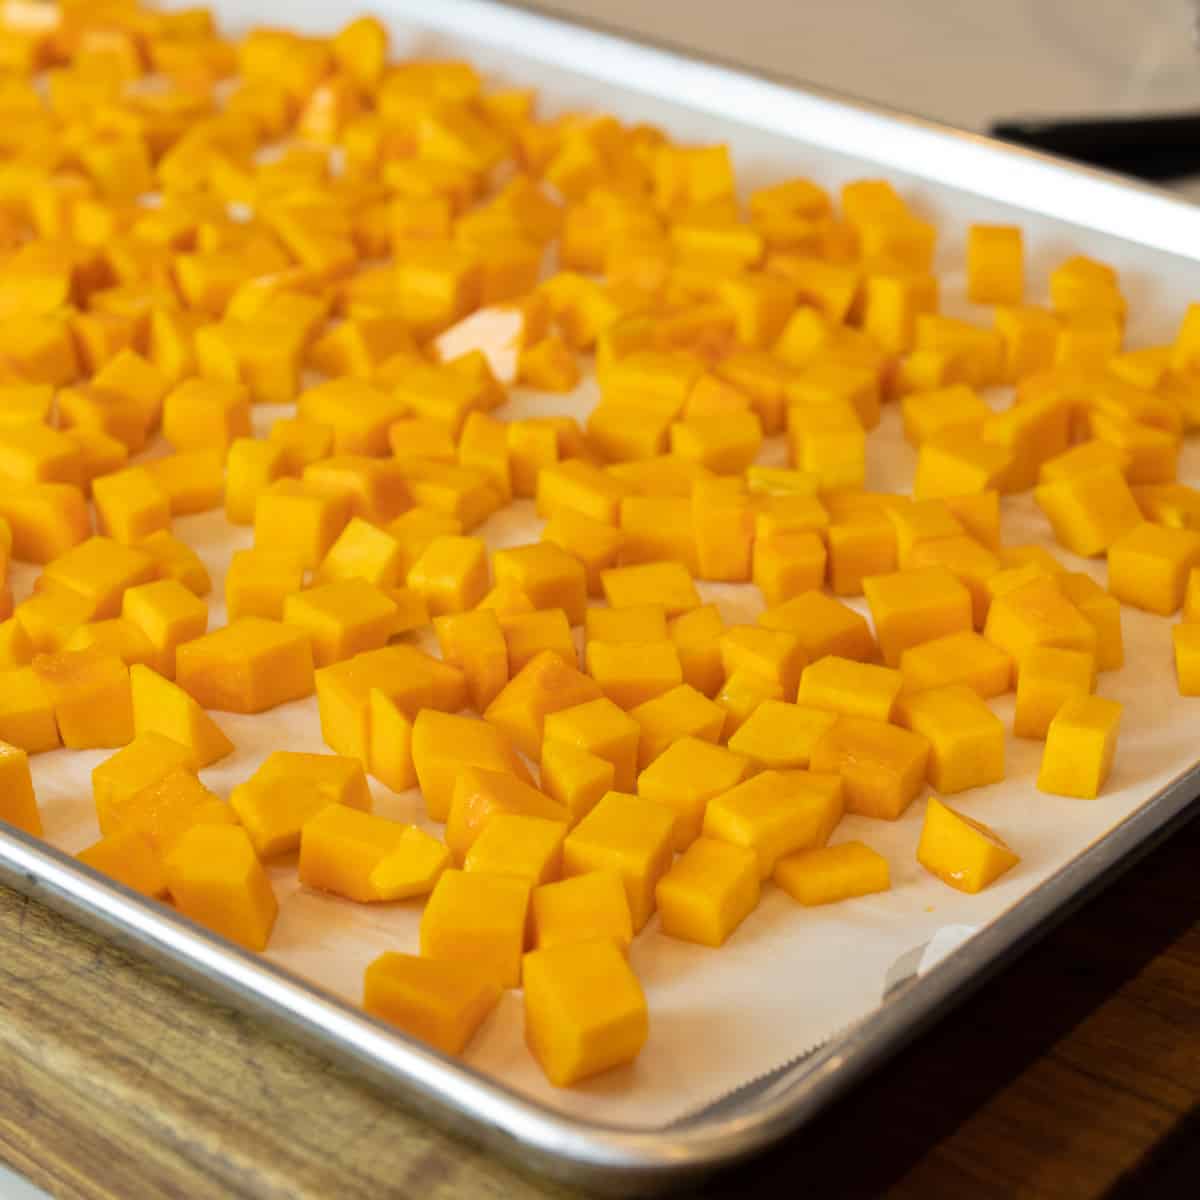 Cubes of butternut squash spread out evenly on a baking sheet.